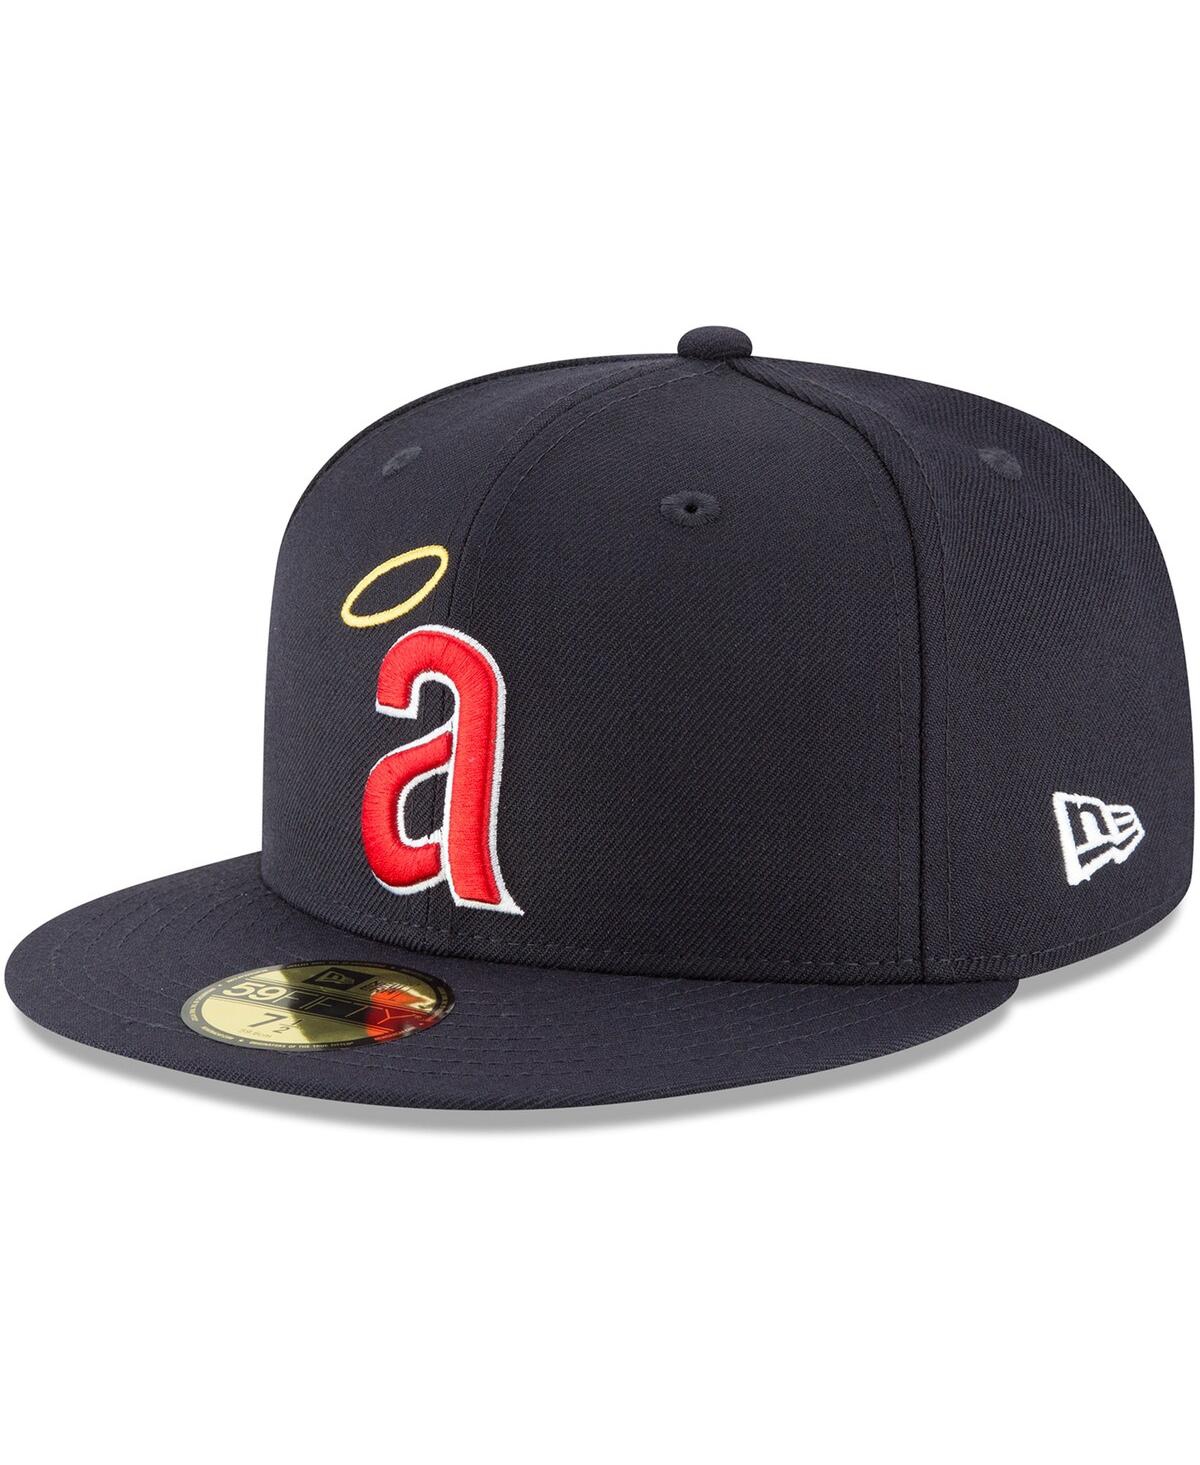 Men's New Era Navy California Angels Cooperstown Collection Wool 59FIFTY Fitted Hat - Navy